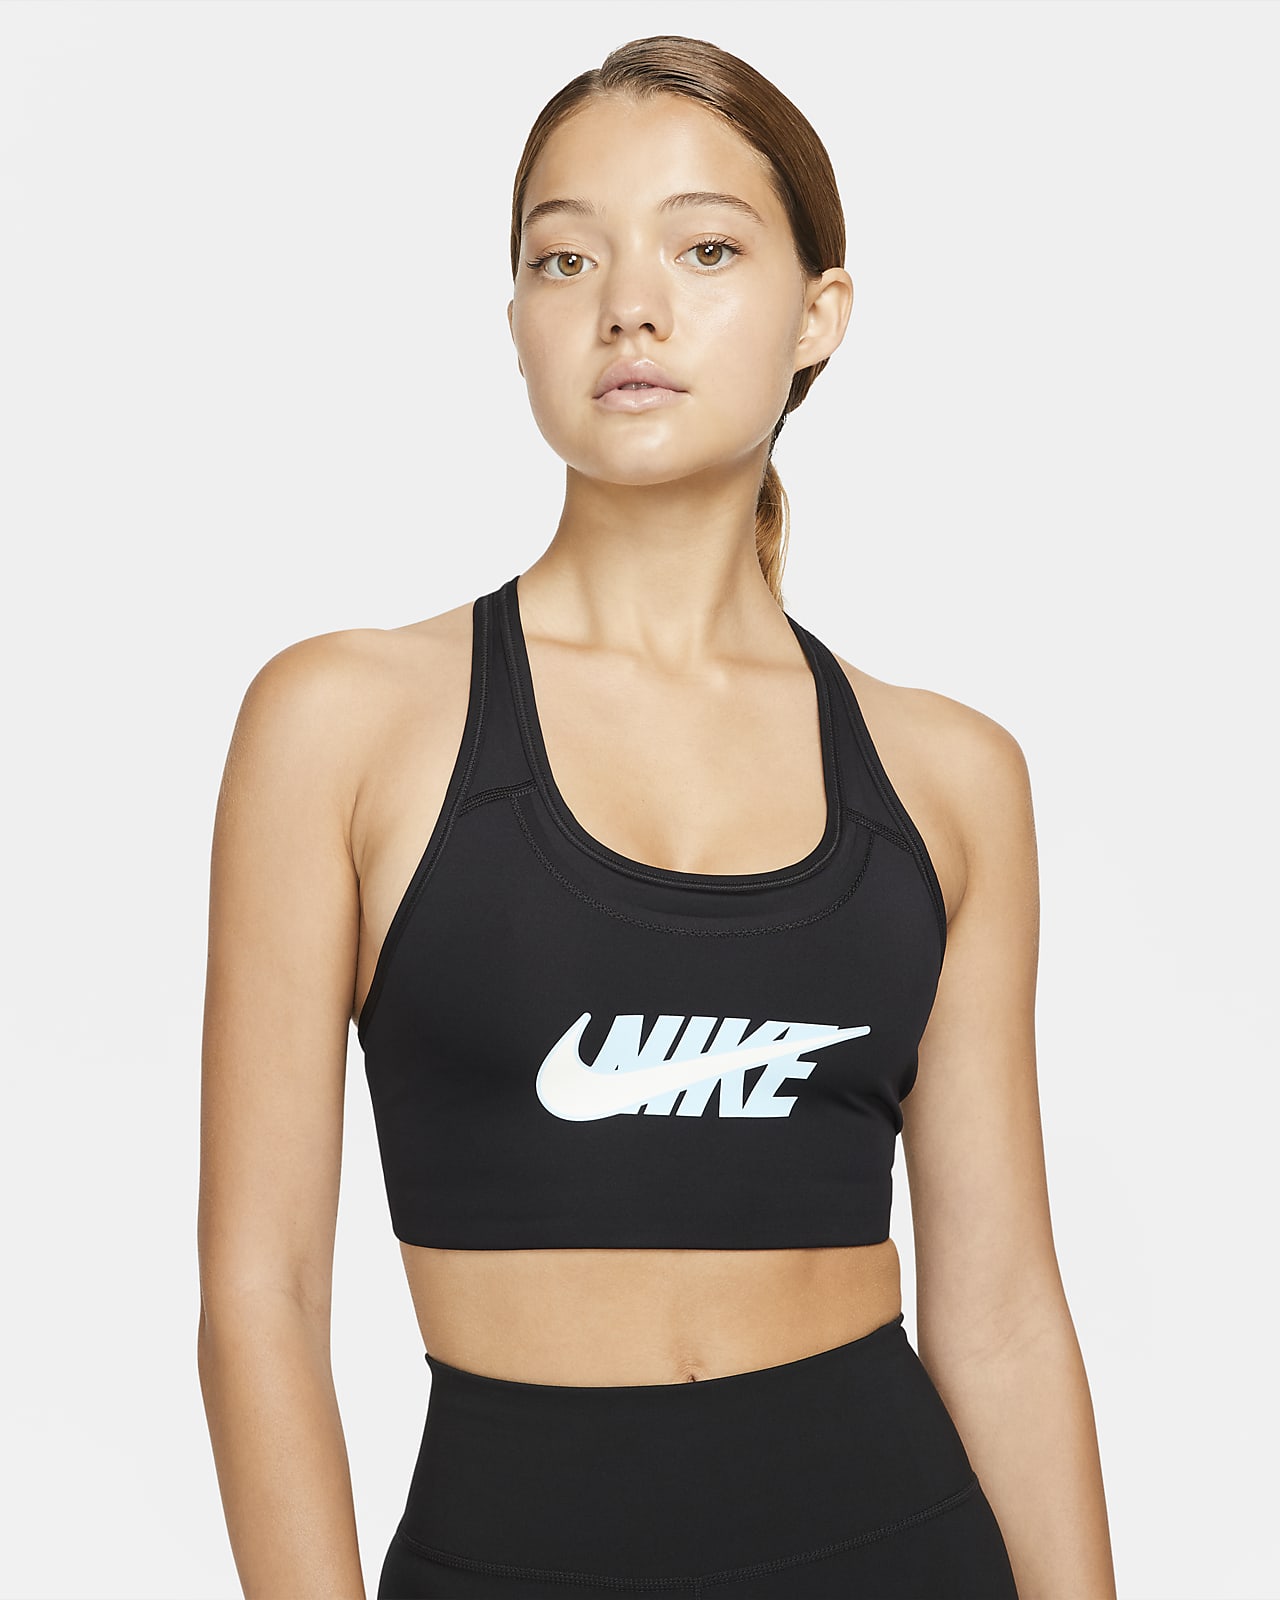 https://static.nike.com/a/images/t_PDP_1280_v1/f_auto,q_auto:eco/8dc1b206-ea5f-4117-9f22-31117ede7dd4/swoosh-icon-clash-womens-medium-support-non-padded-graphic-sports-bra-zx0VSS.png